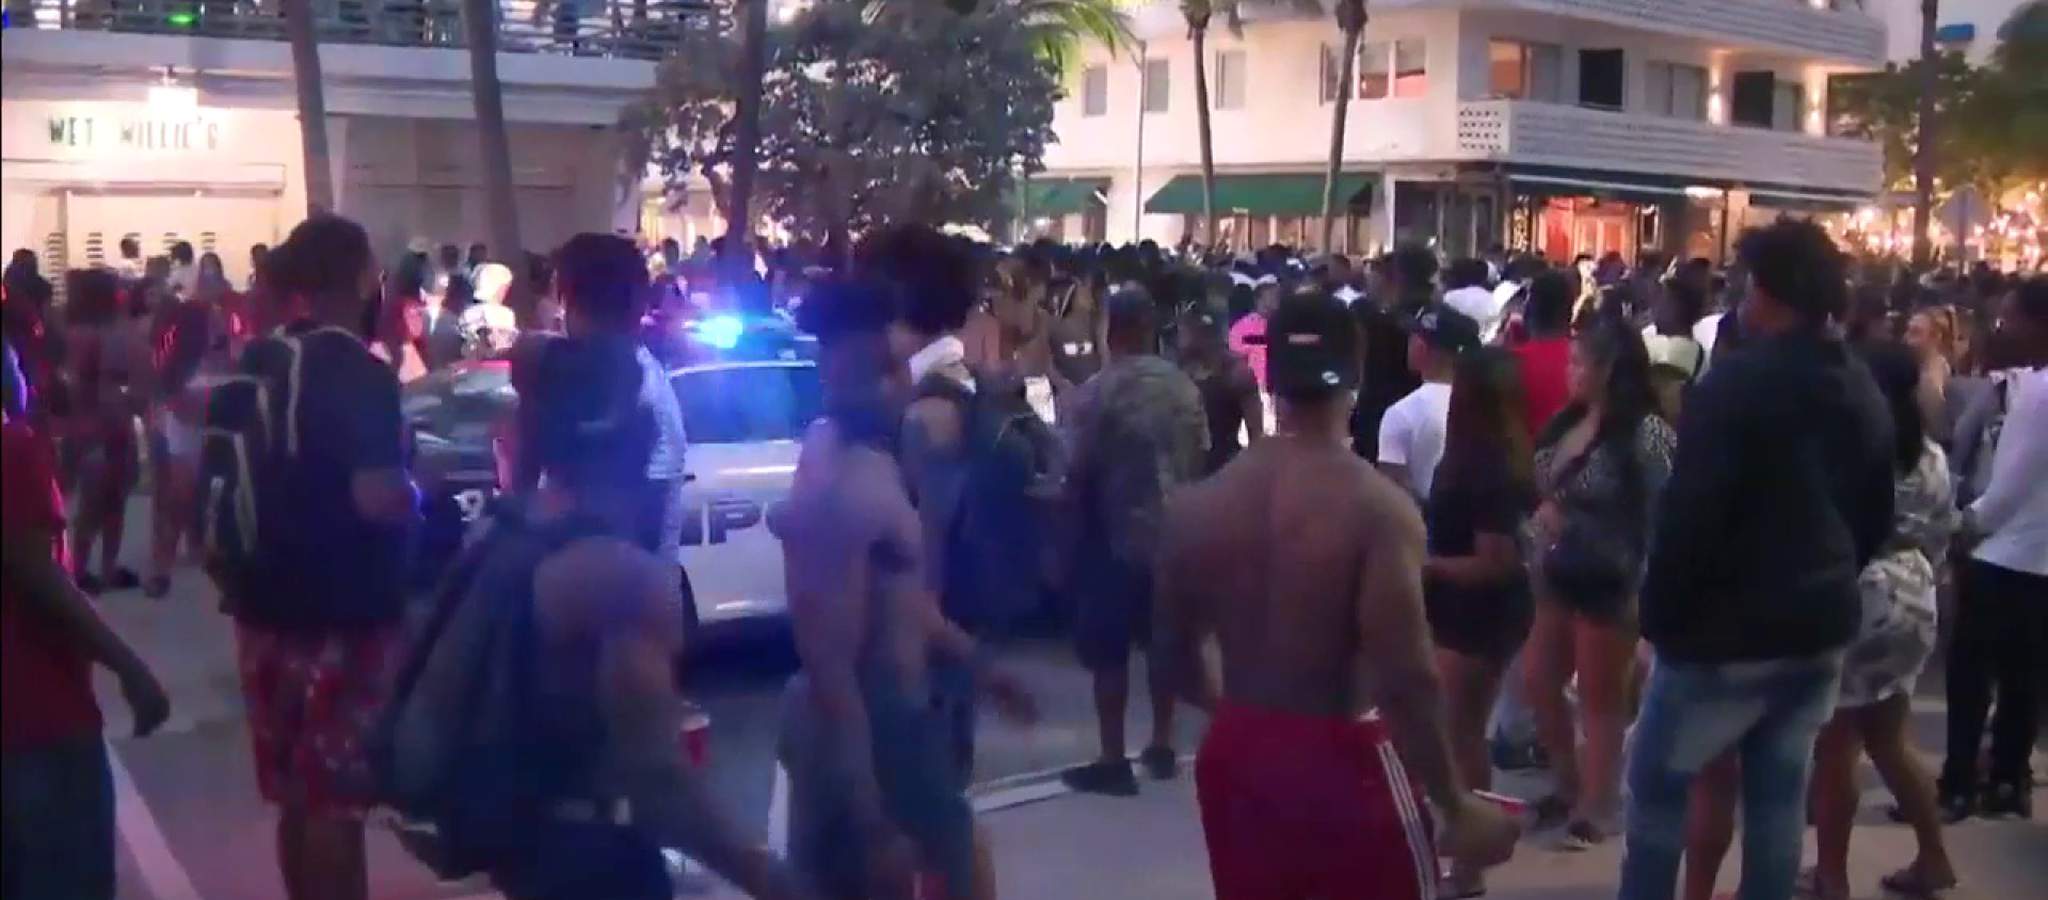 Black community leaders question if race is playing role in increase of Miami Beach police activity during spring break